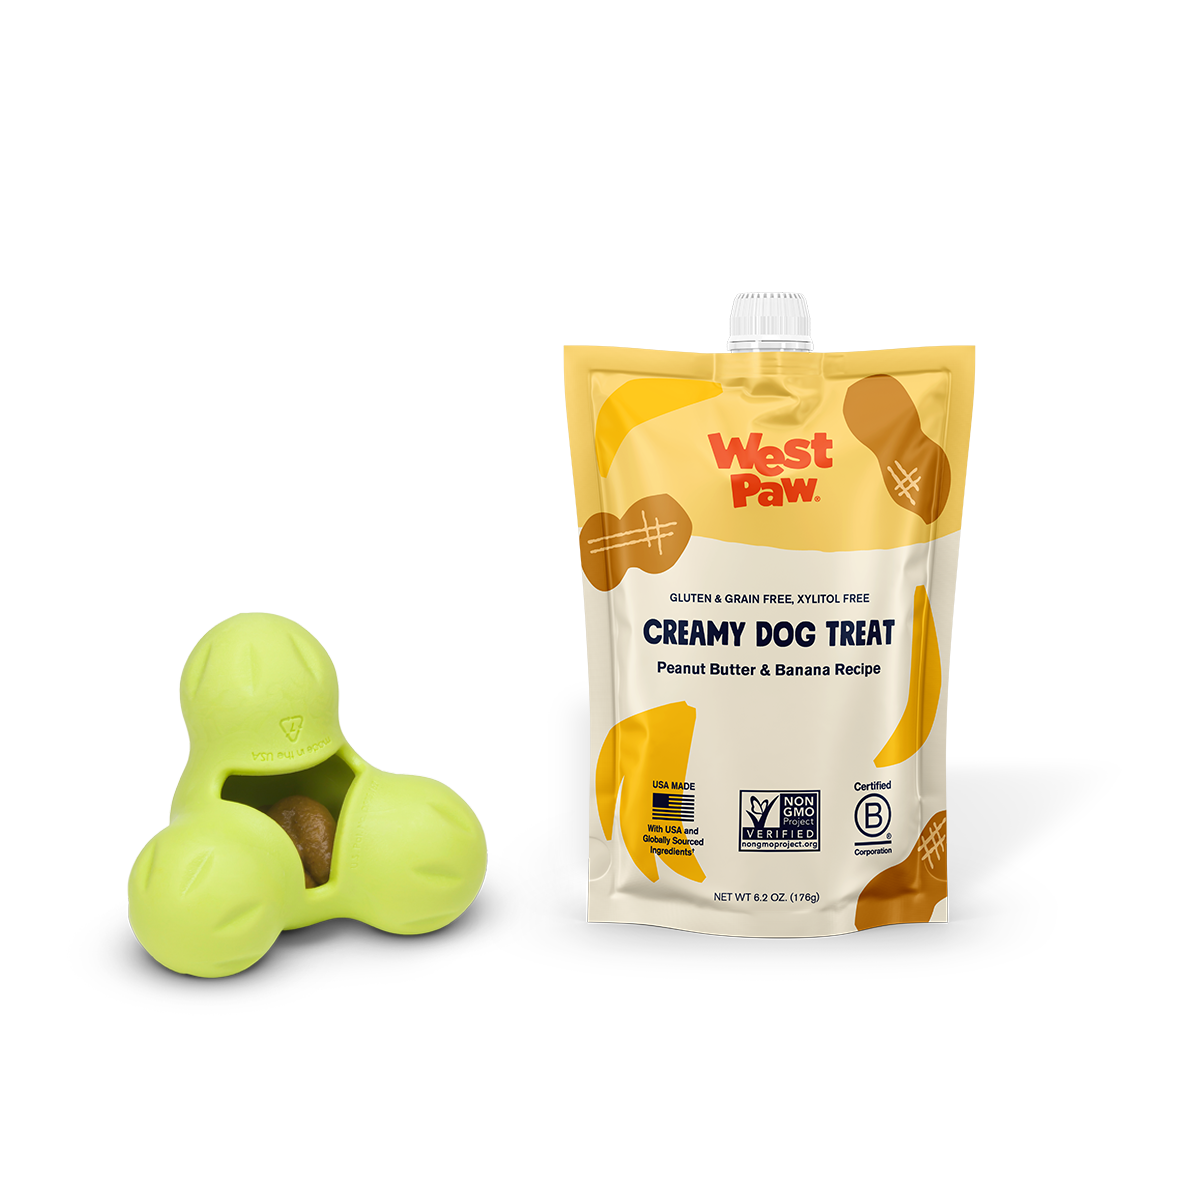 West Paw Peanut Butter and Banana Creamy Dog Treat